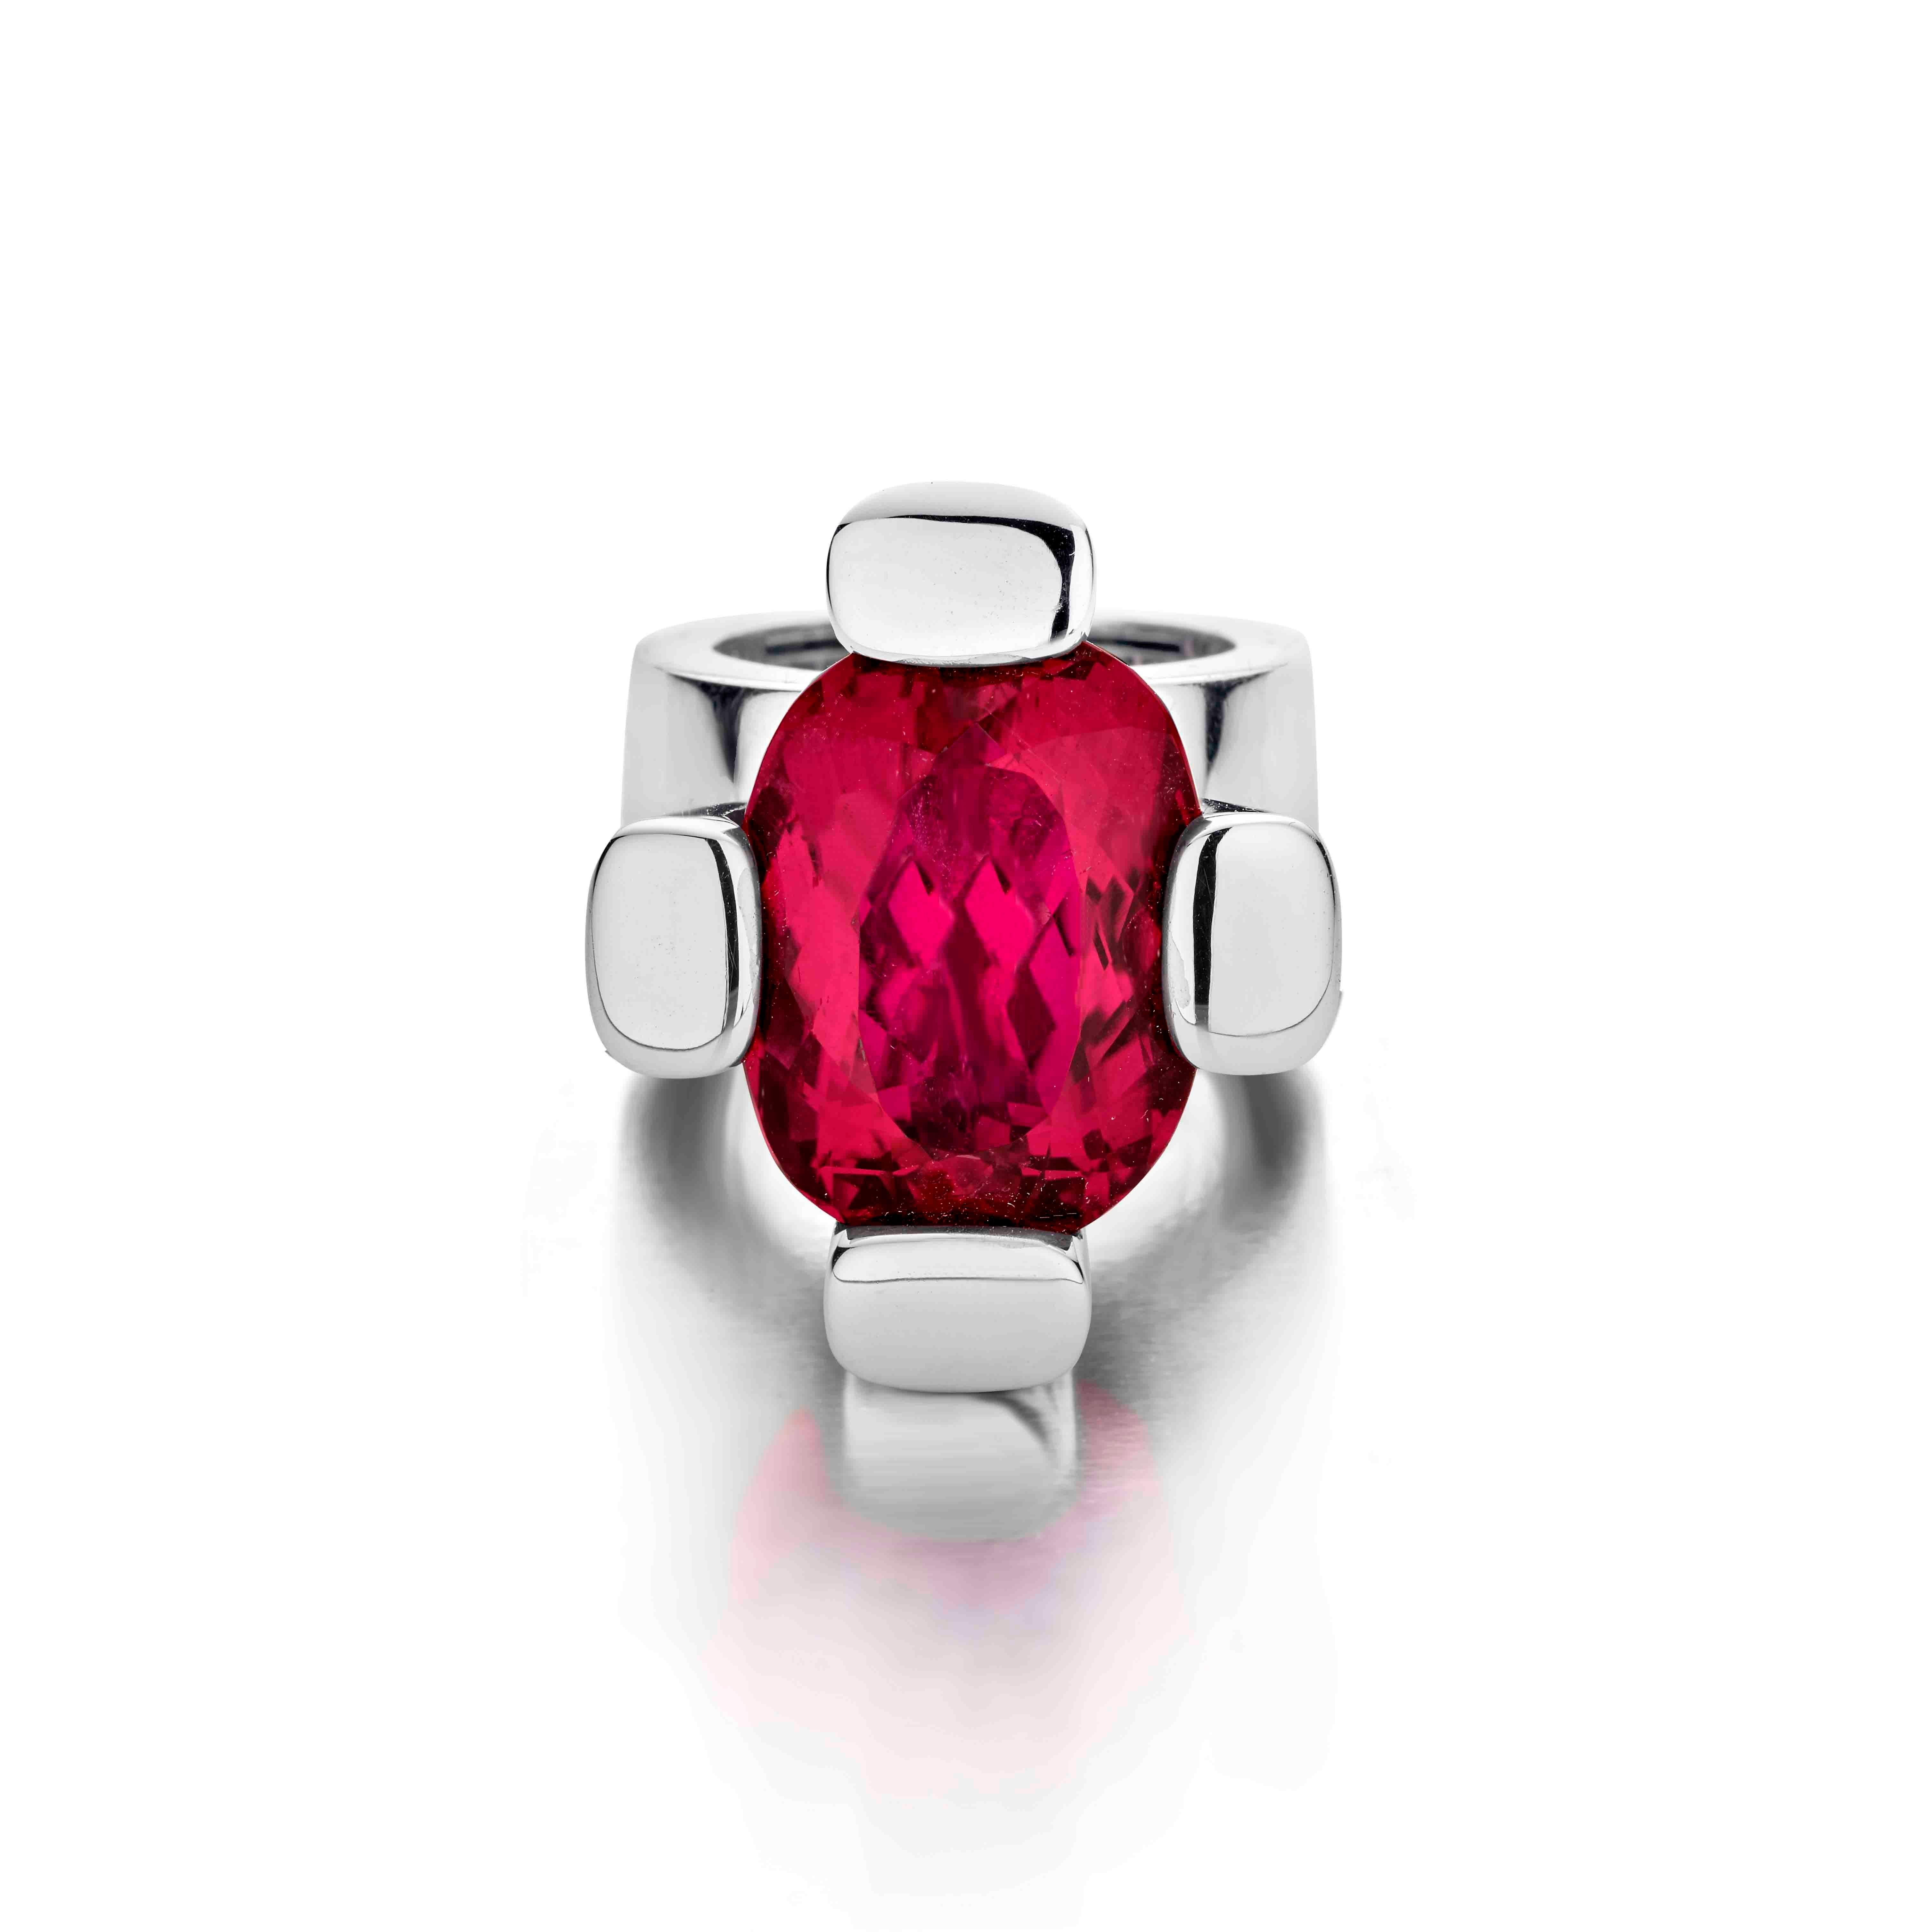 White gold ring (18K), featuring a Deep Reddish Purplish Pink Rubellite of 28.85ct.
Oval mixed cut measuring 20 x 14.8 x 11.7 mm.

This items name was given the 